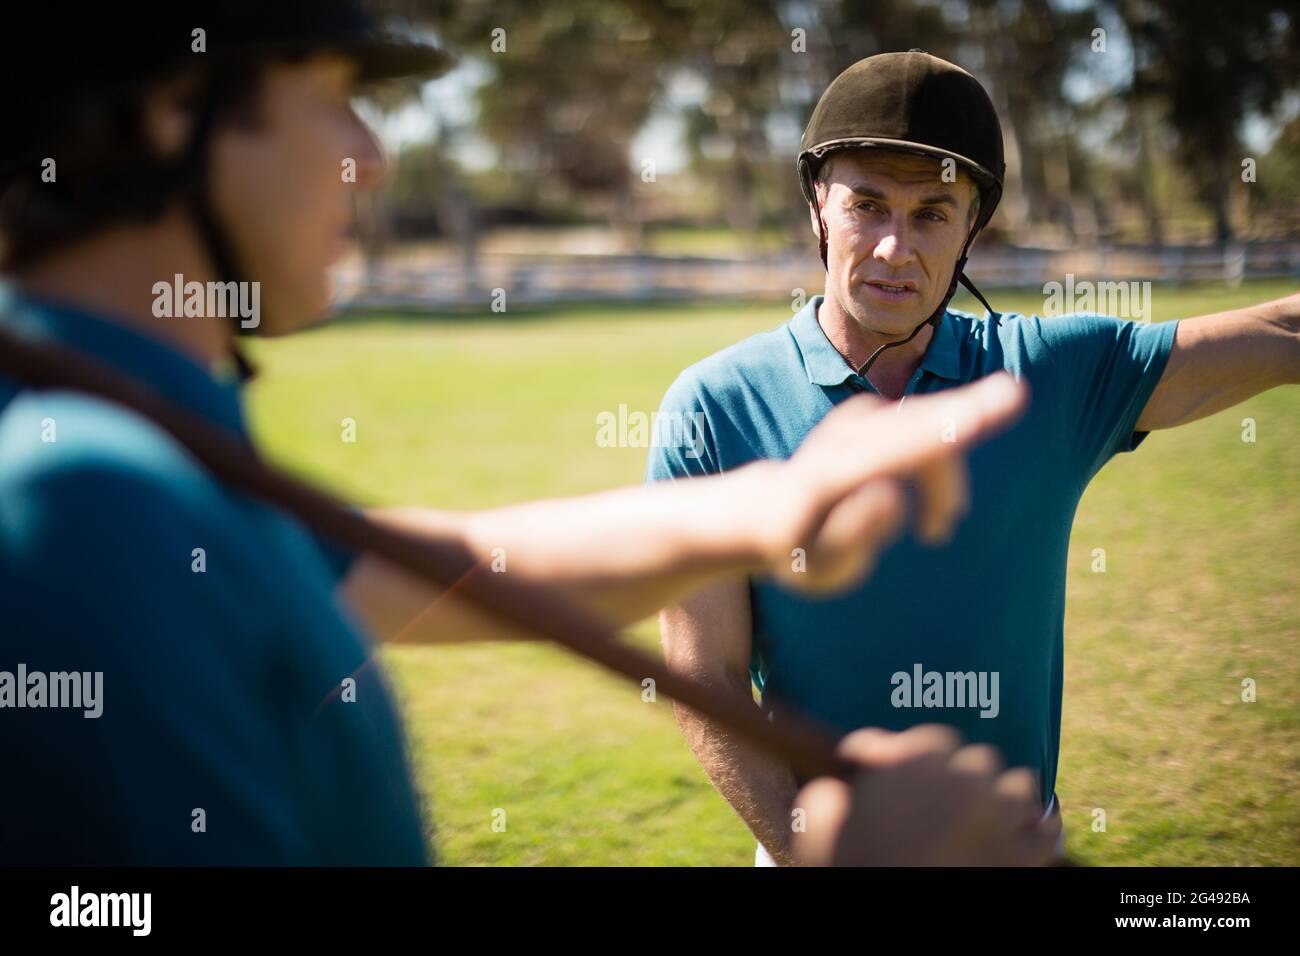 Tow male jockey talking to each other Stock Photo